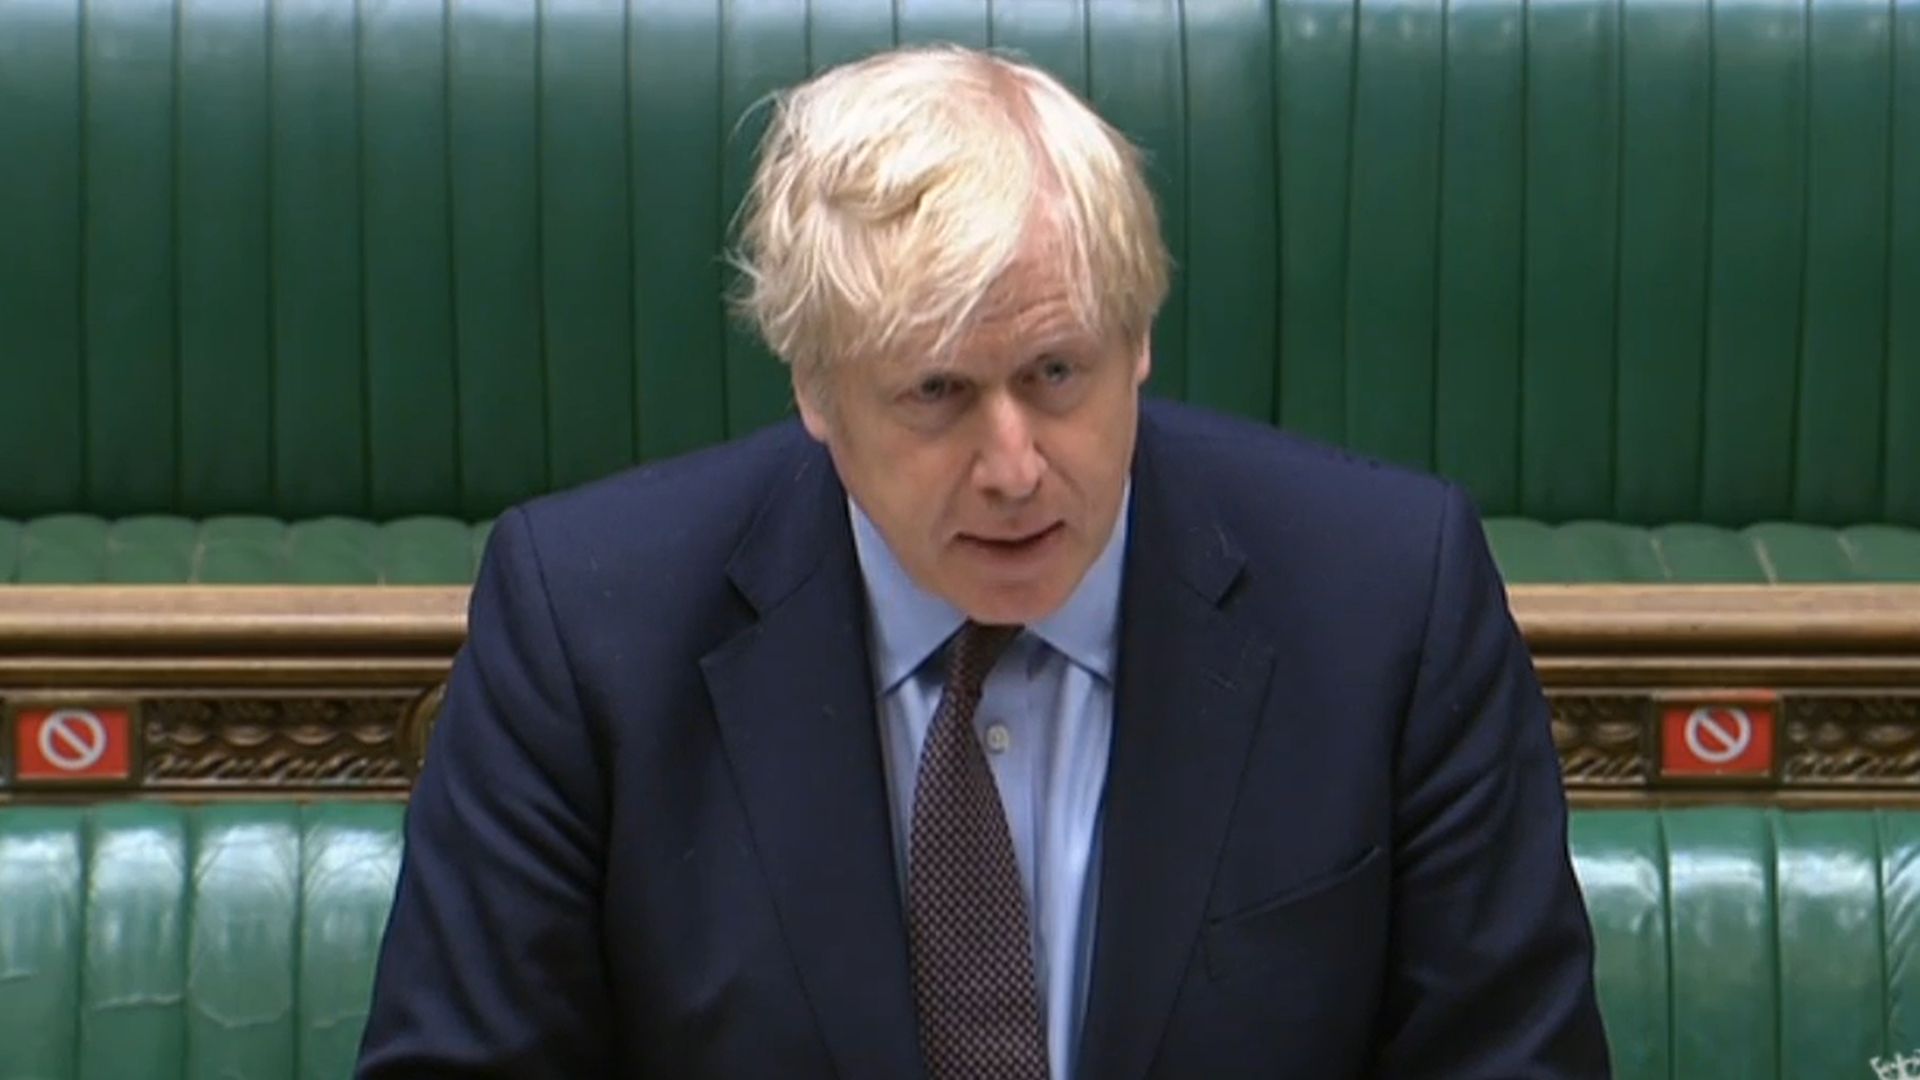 Prime minister Boris Johnson speaks during Prime Minister's Questions in the House of Commons, London - Credit: PA